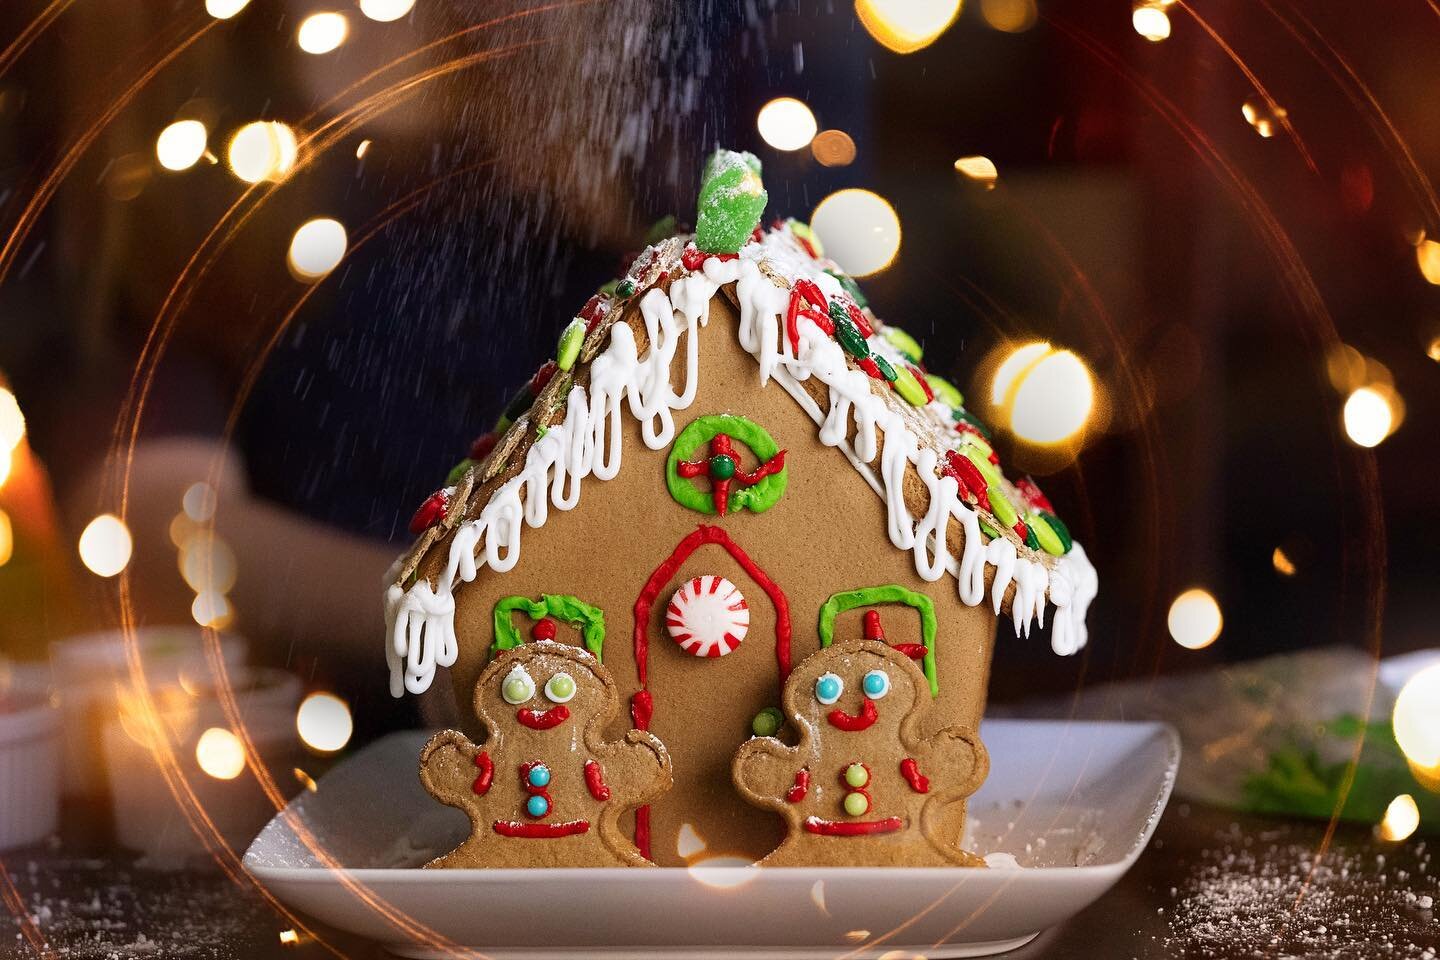 Decorating gingerbread houses is one of my daughter&rsquo;s favorite traditions ❤️

Swipe for the before and after! Unlocking the Magic of Photoshop begins 01/09/23 over at @clickphotoschool ❤️

Preassignment is already posted so head on over to clic